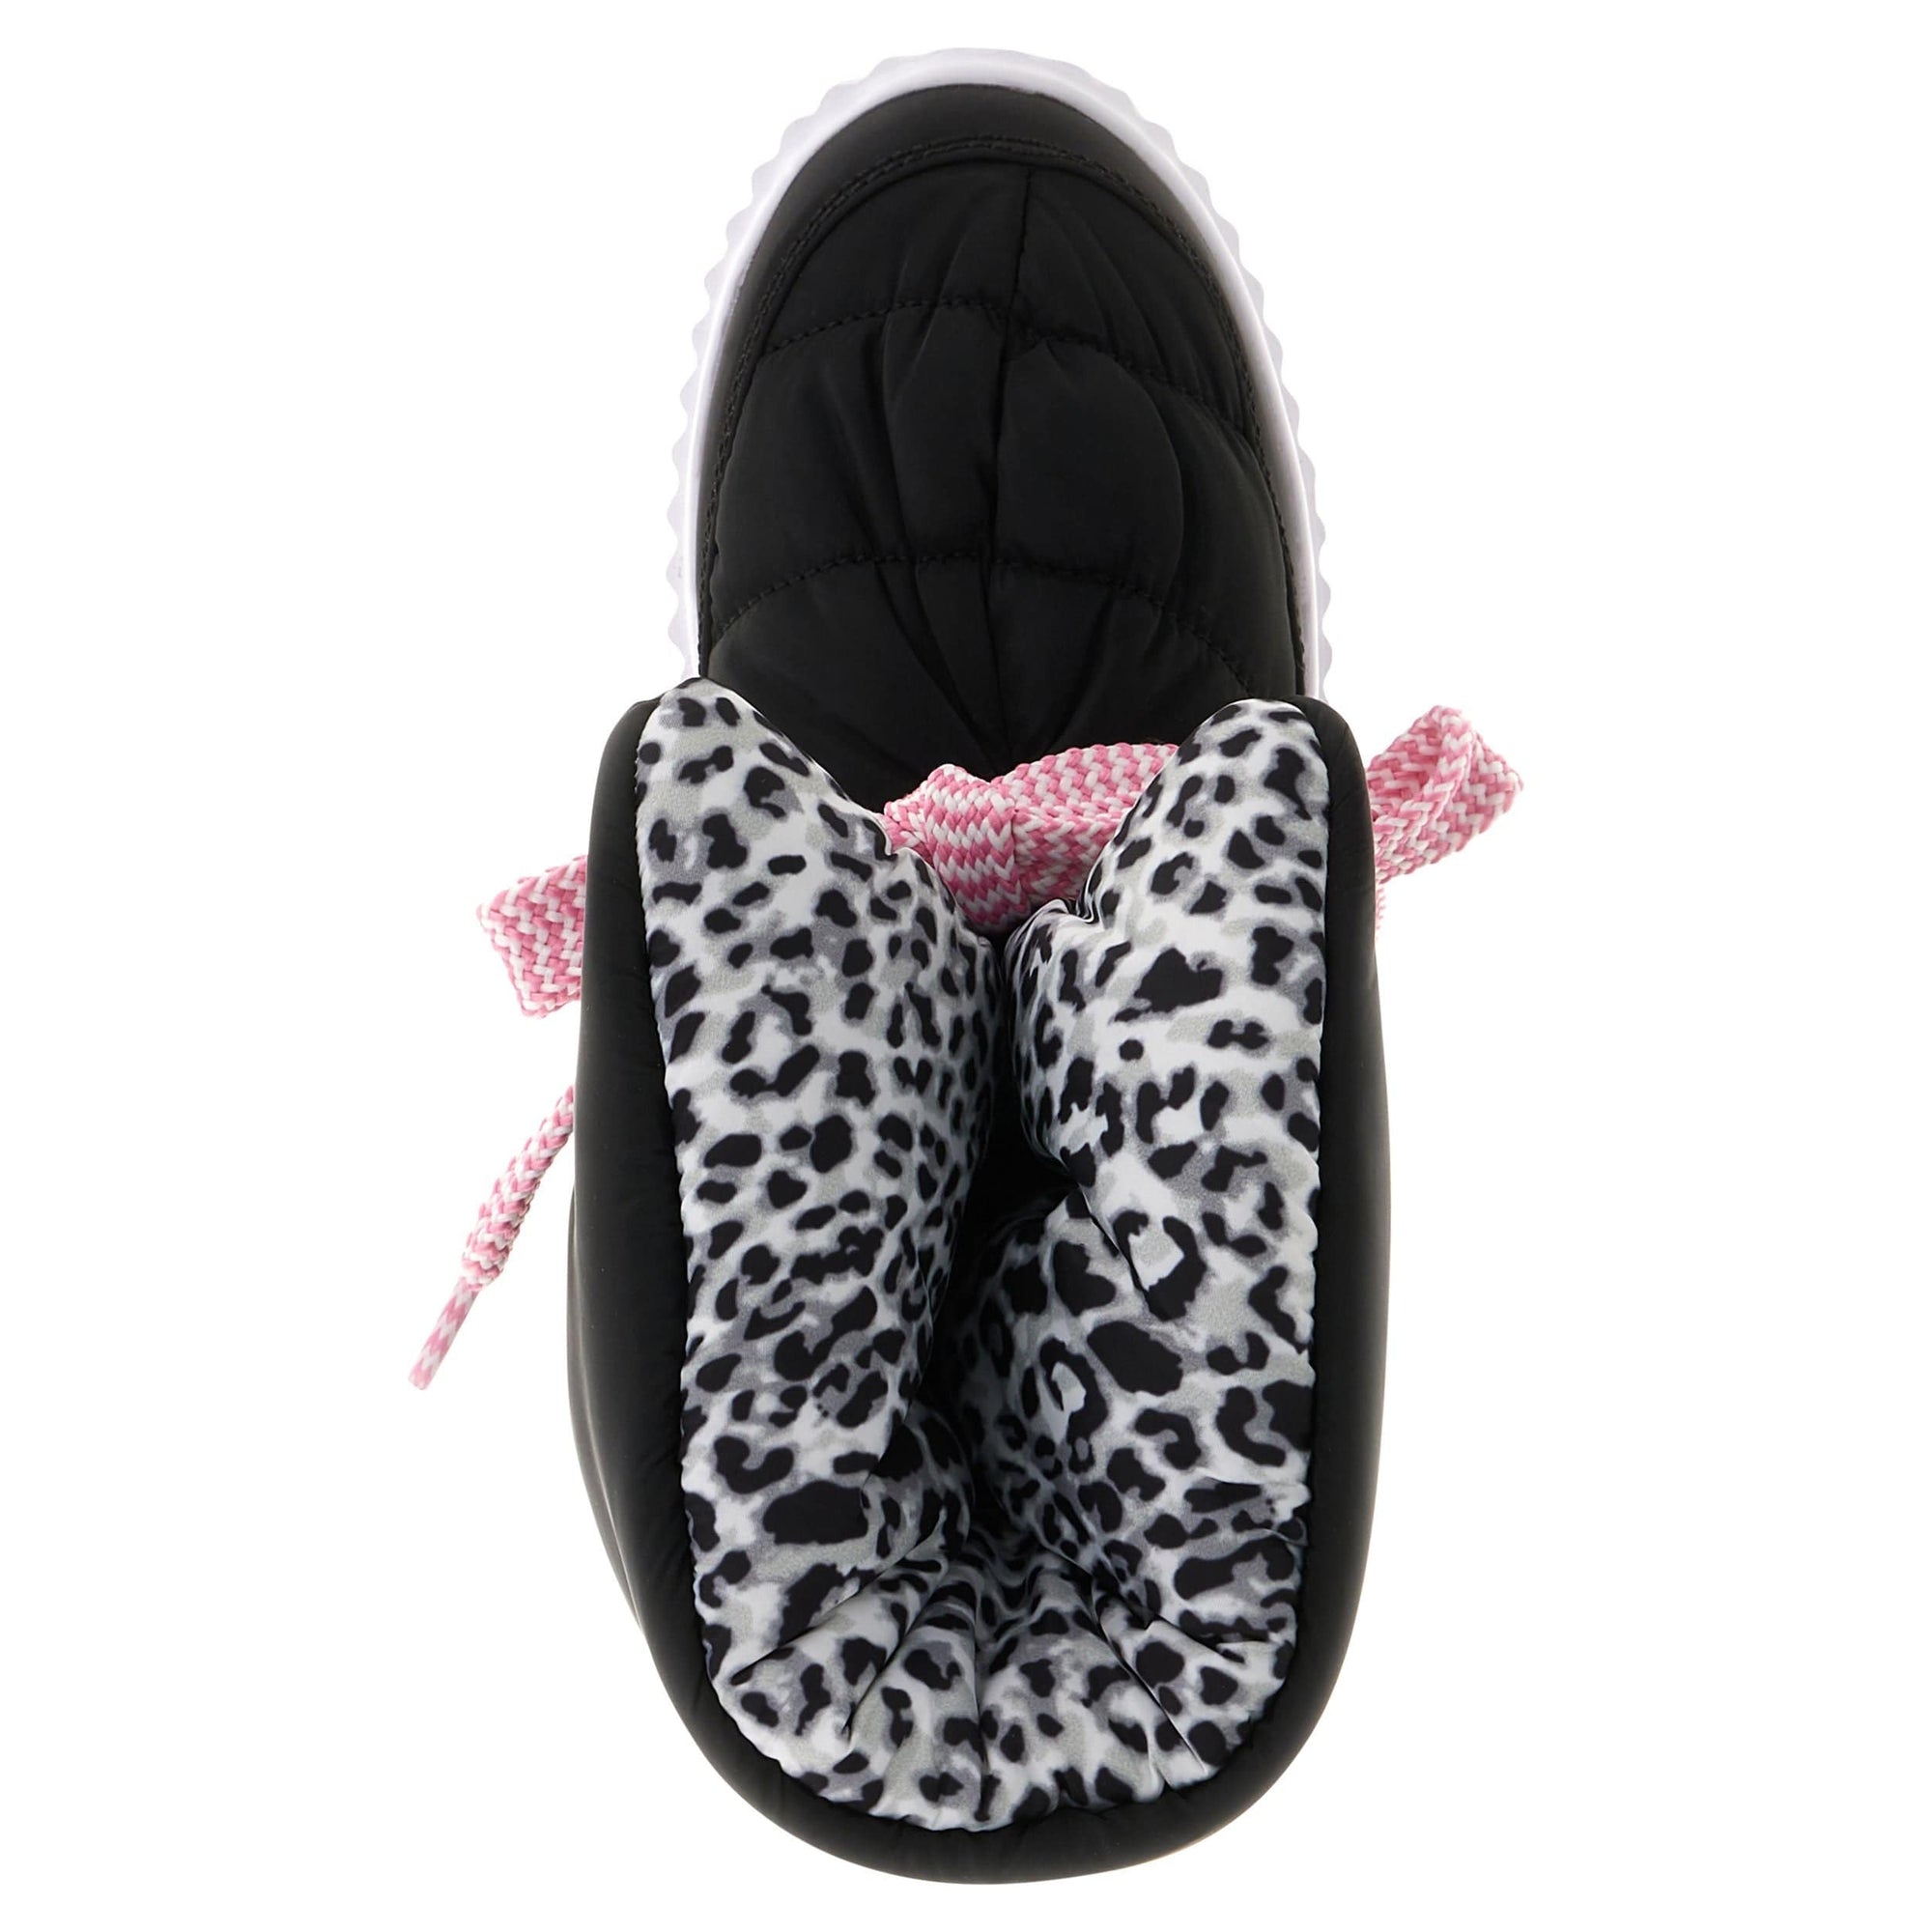 Puff Boots with Fleece Lining - Black + Leopard Lining 2